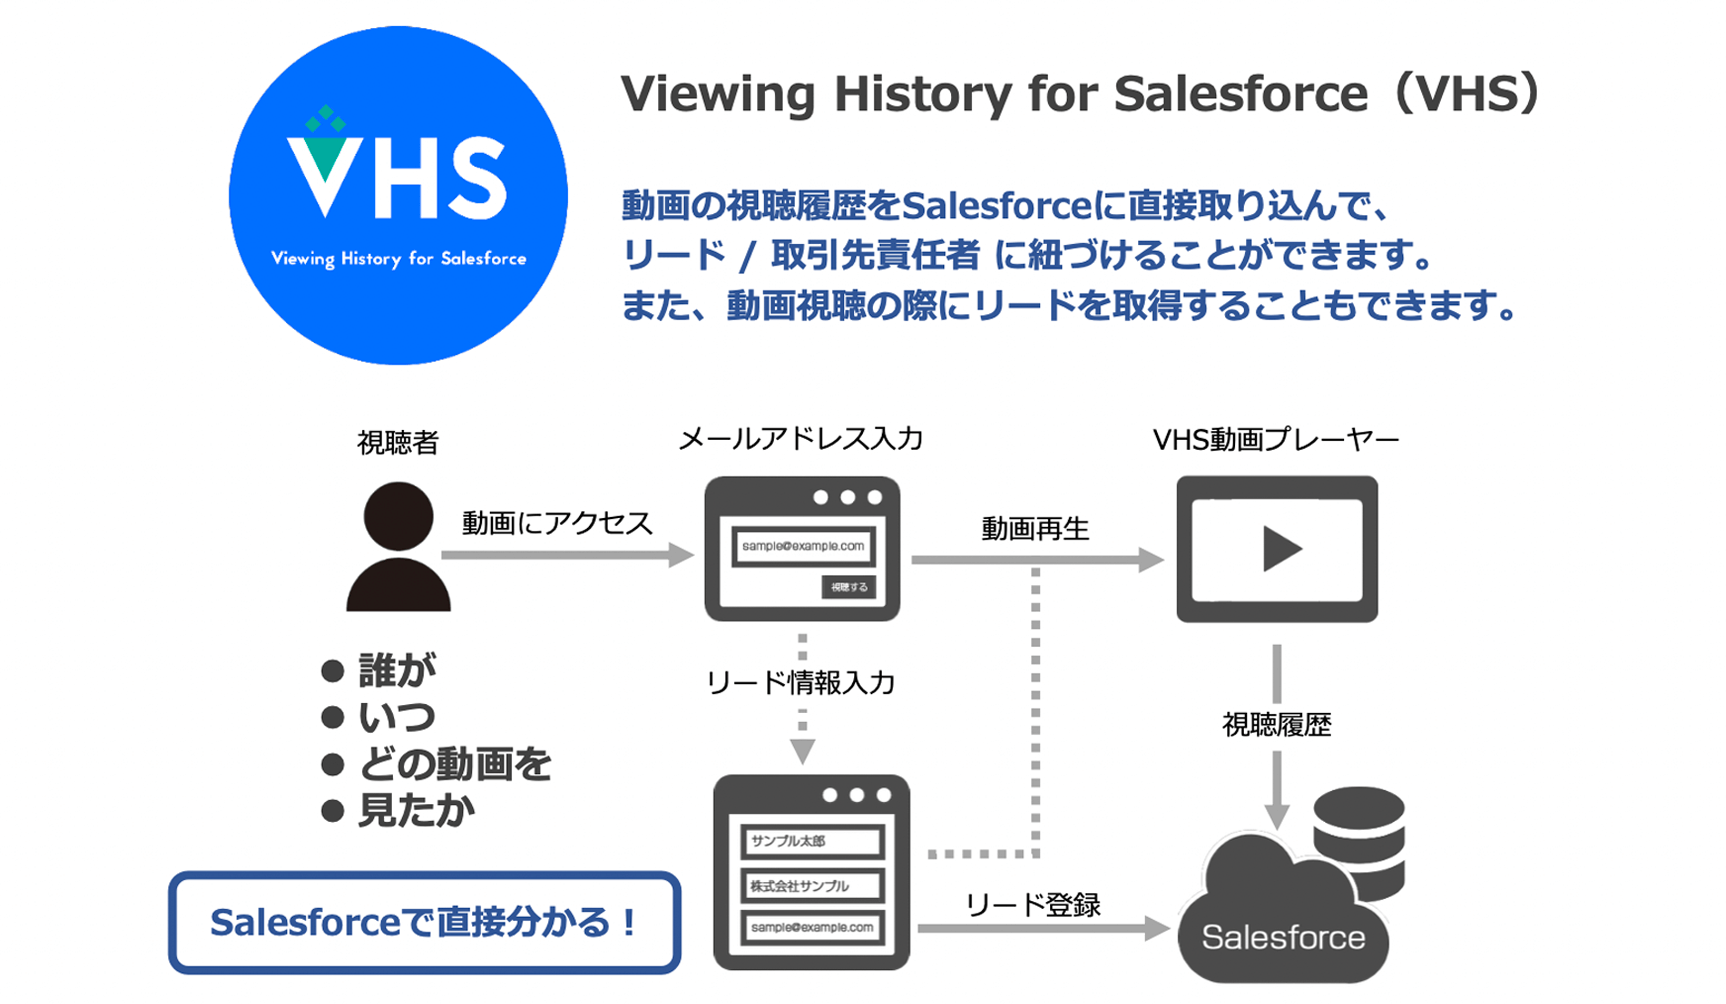 Viewing History for Salesforce